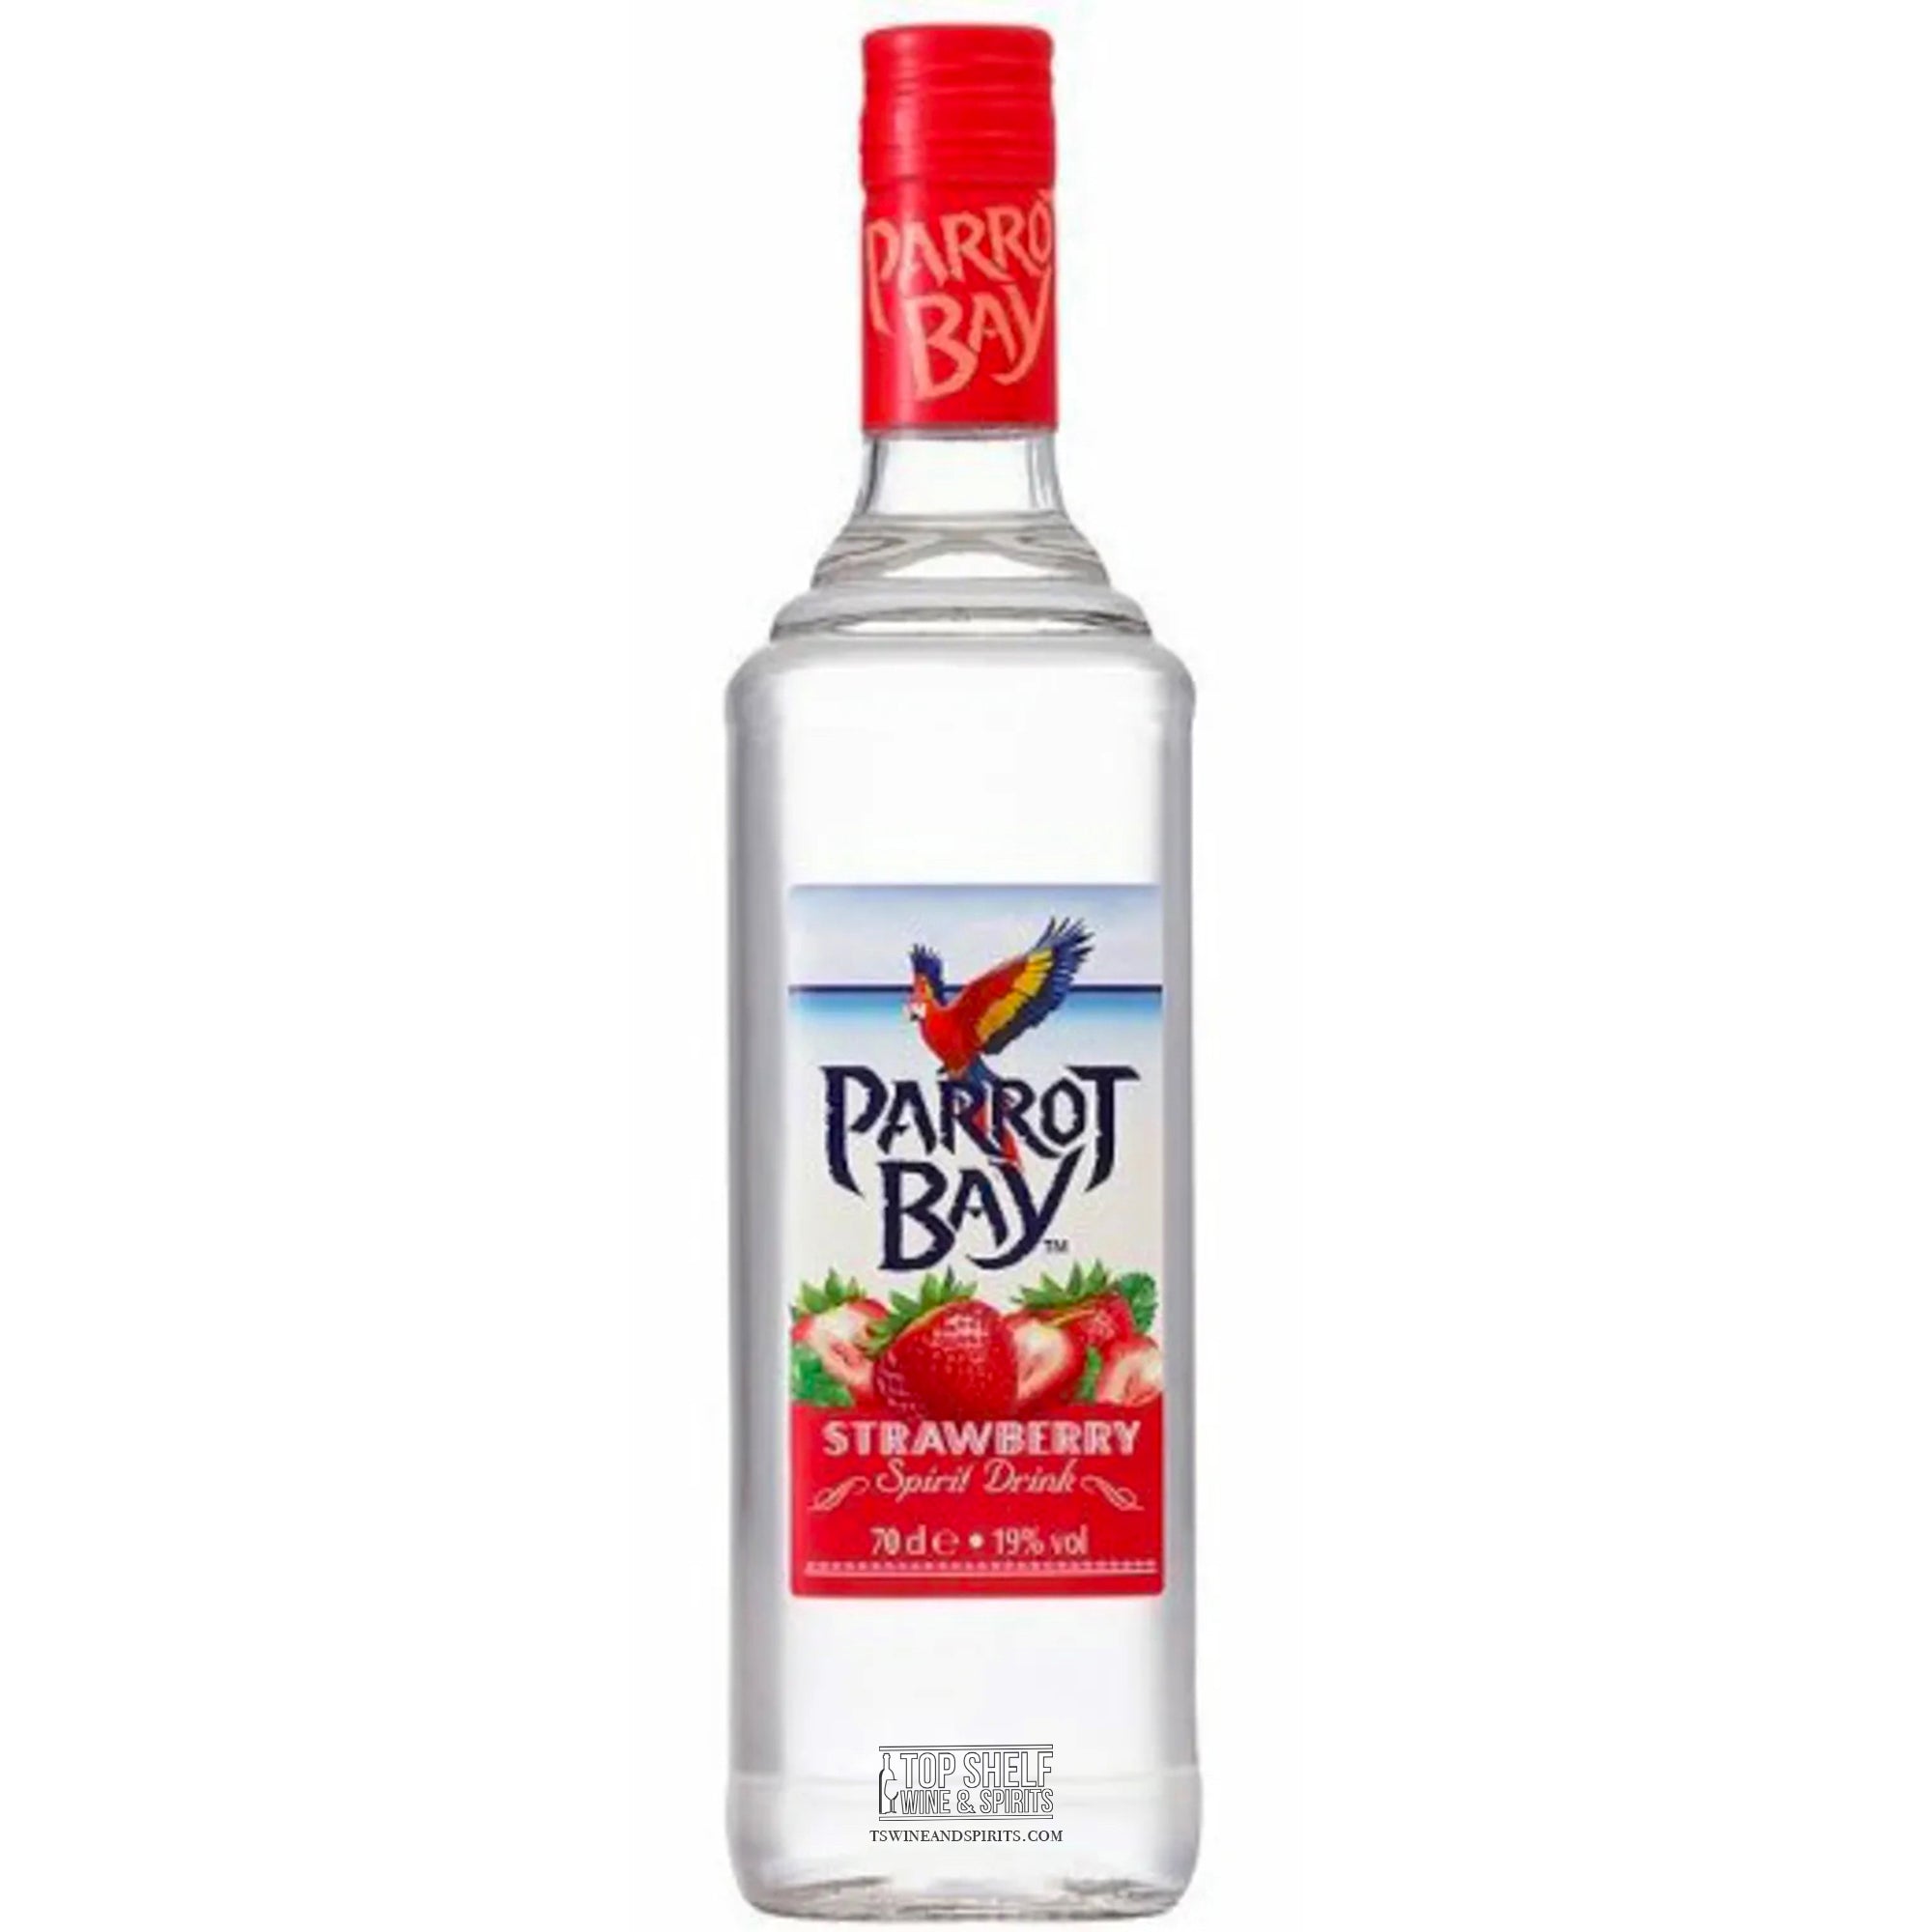 Parrot Bay Strawberry Rum